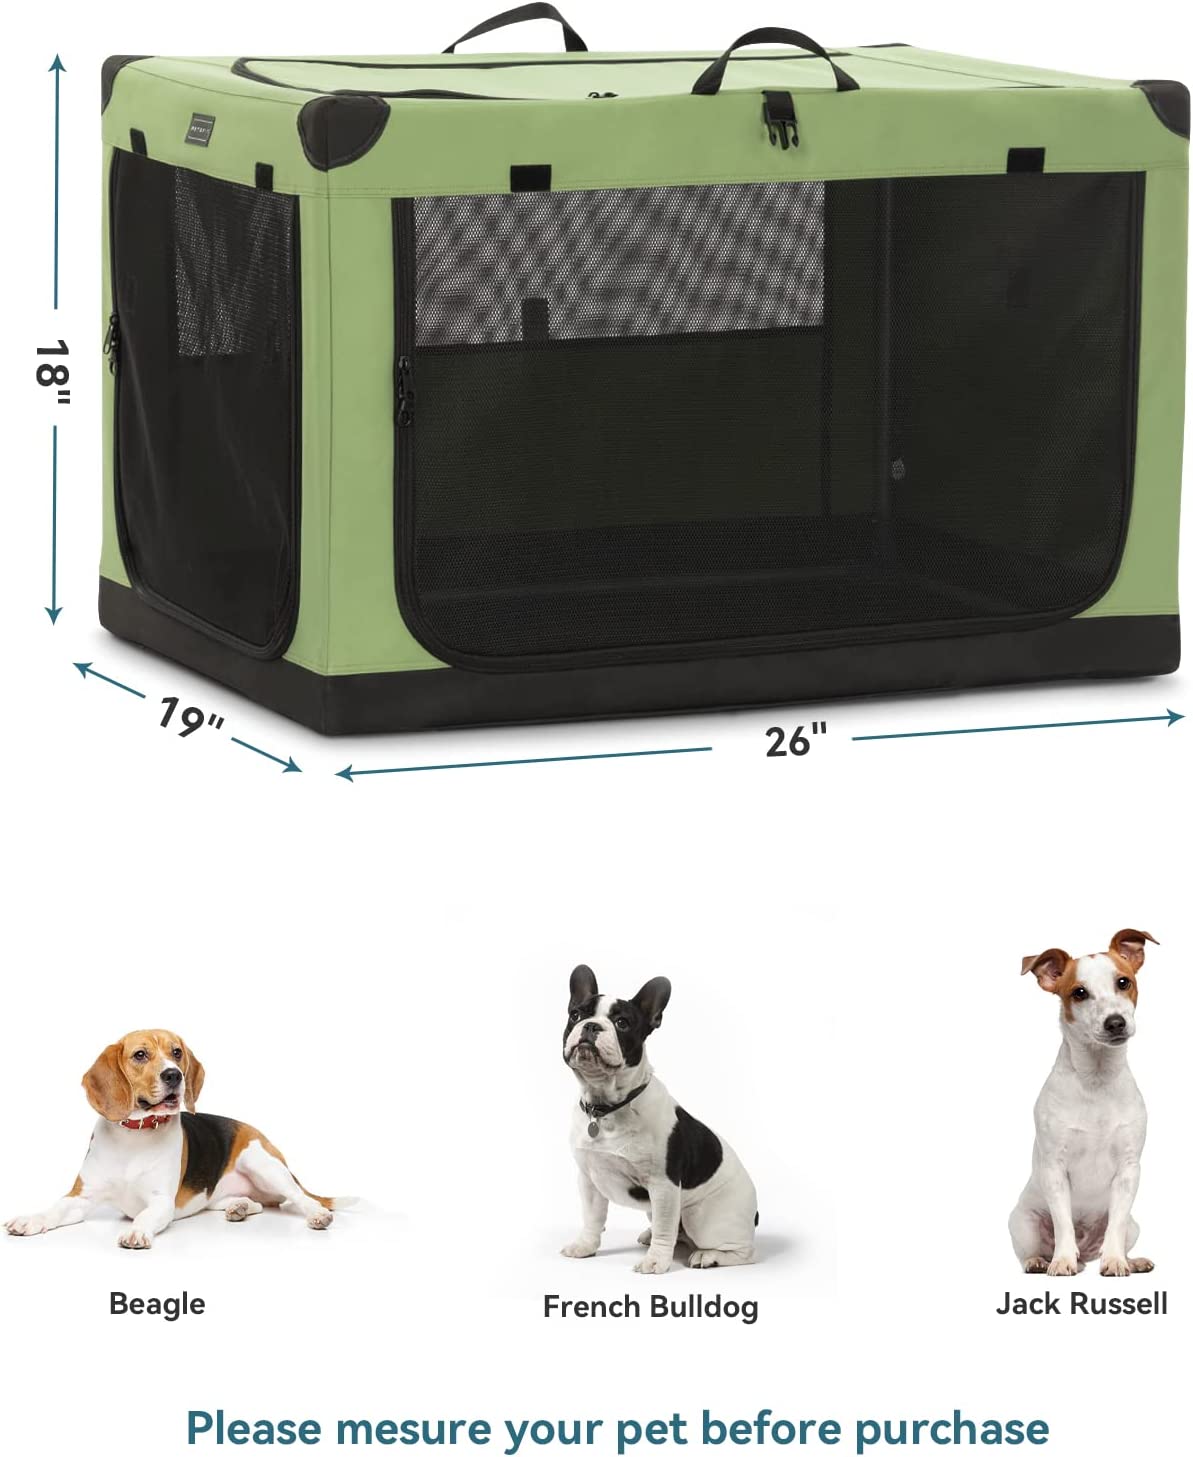 Small Dog Crate， Adjustable Fabric Cover by Spiral Iron Pipe， Strengthen Sewing Escape Proof Dog Crate 3 Door Design